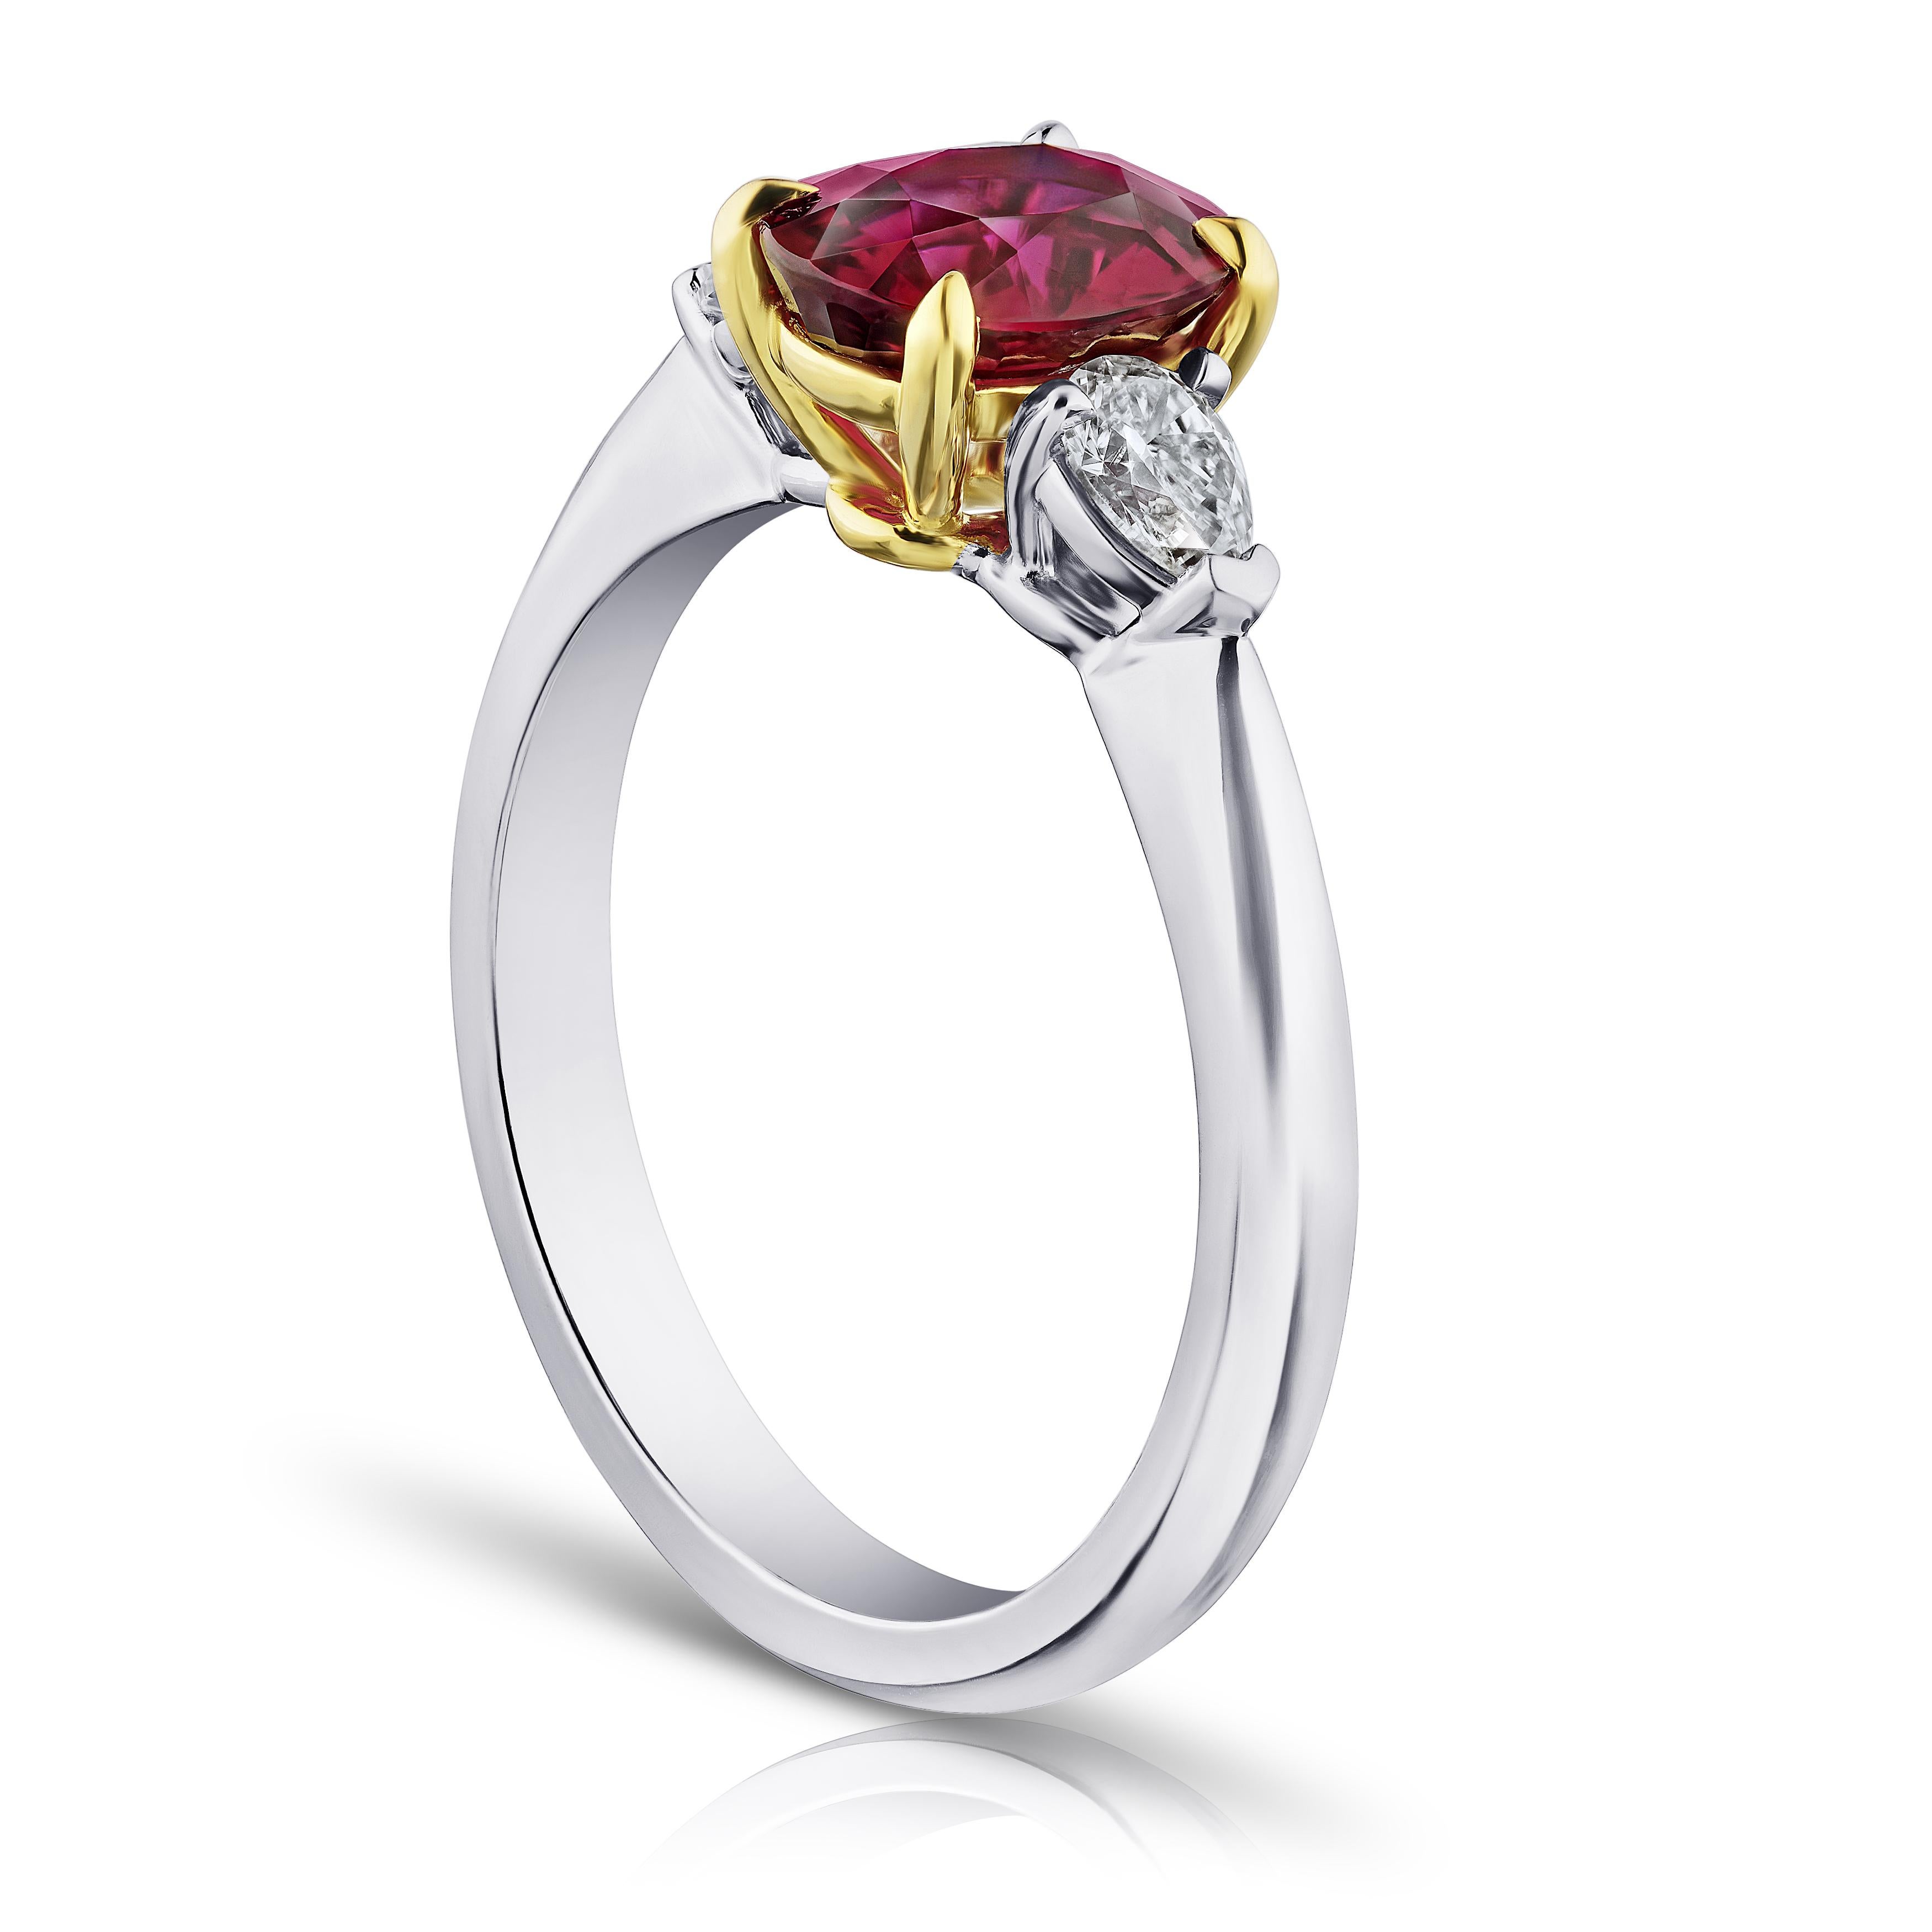 1.72 carat oval red ruby with pear shape diamonds .33 carats set in a platinum with 18k yellow gold ring. Ring is currently a size 7. Resizing to your finger size is included.
